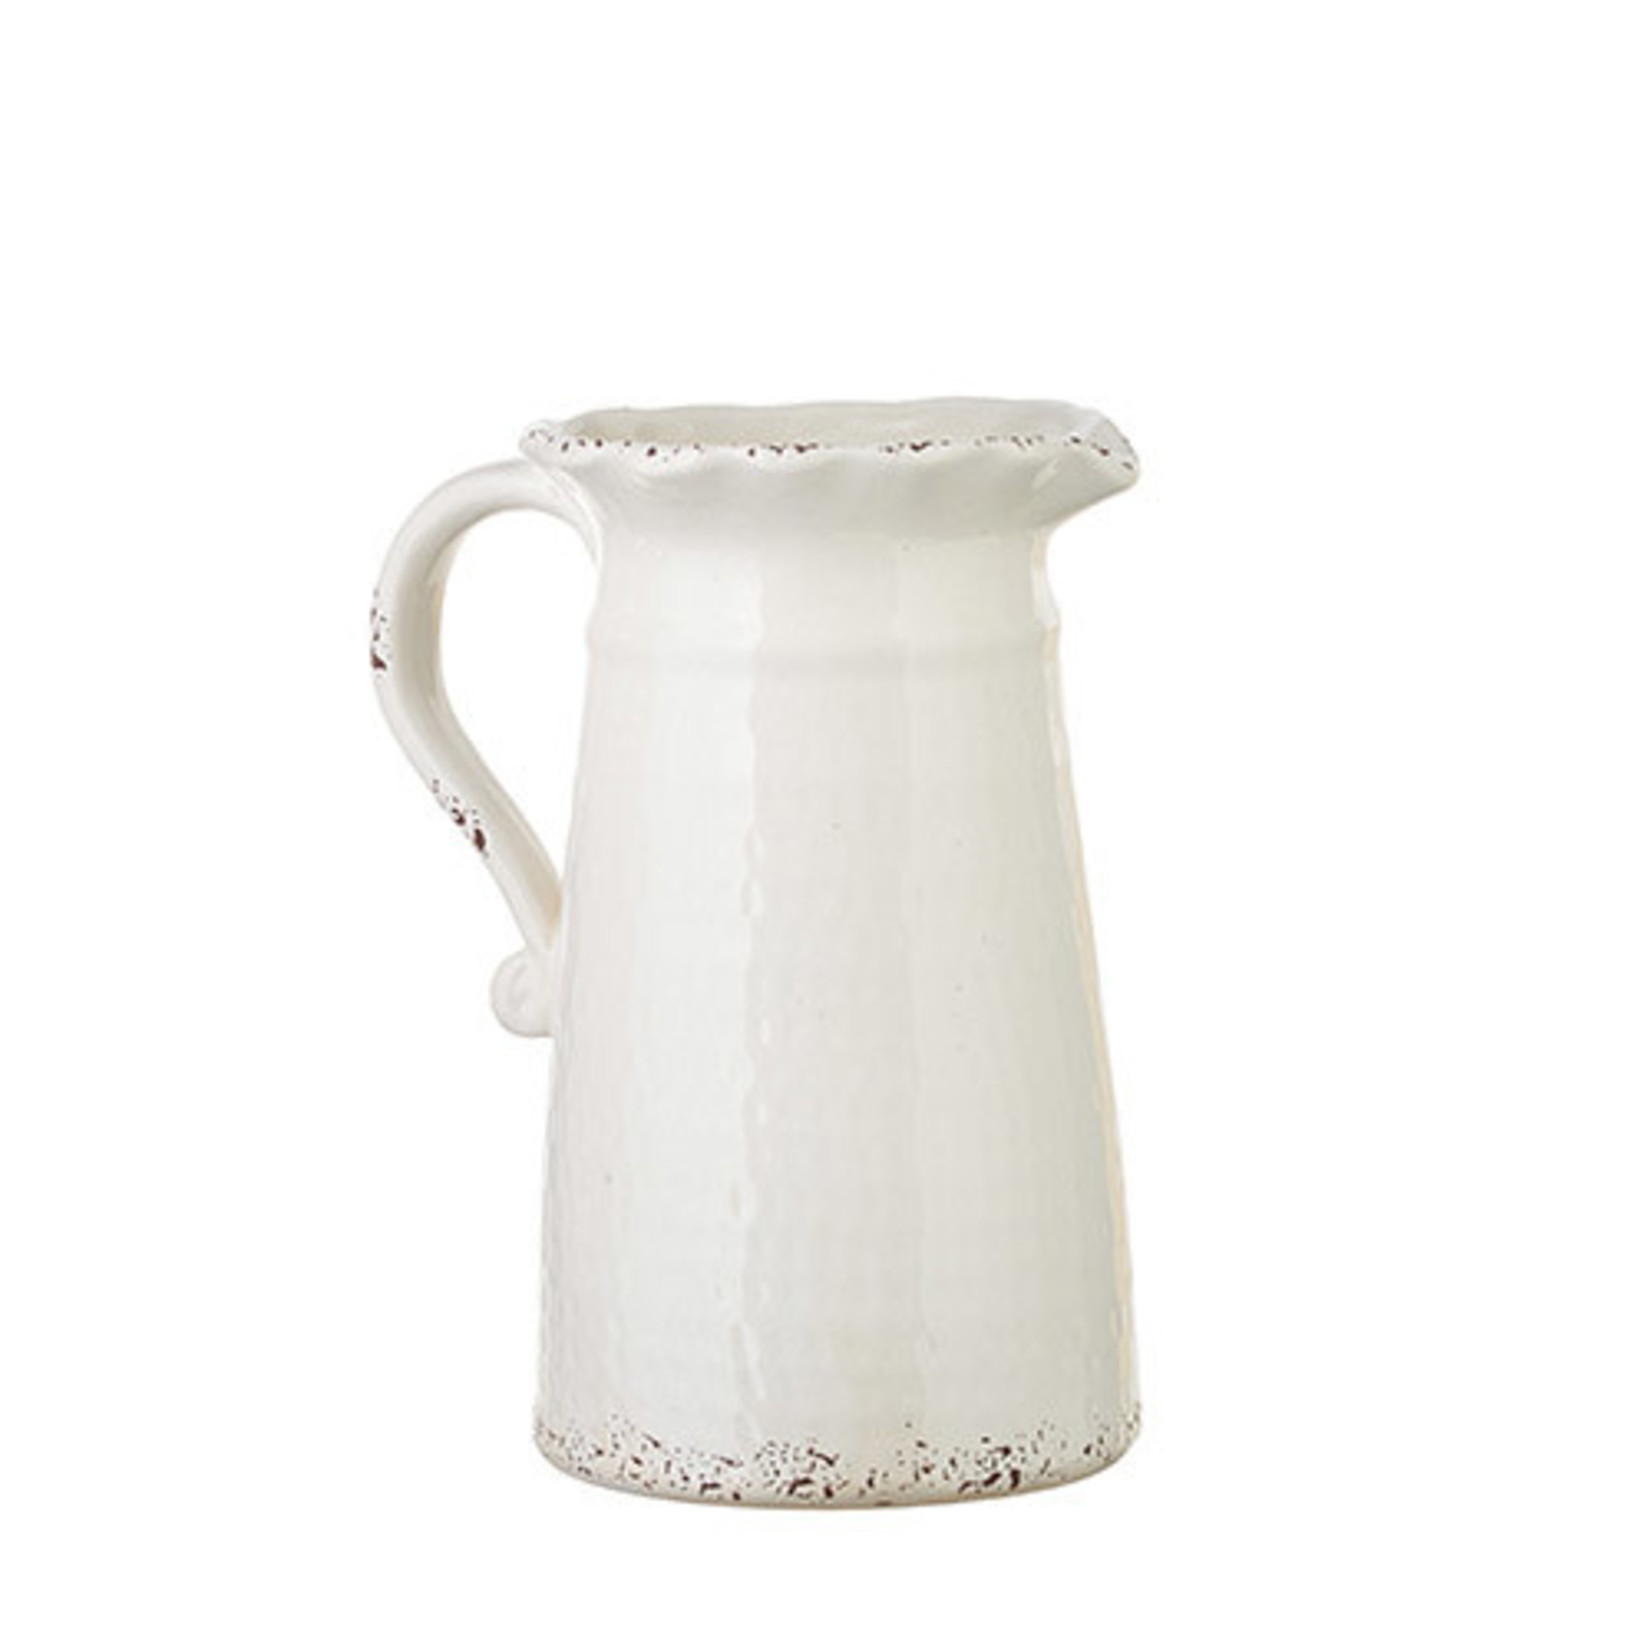 DISTRESSED WHITE PITCHER